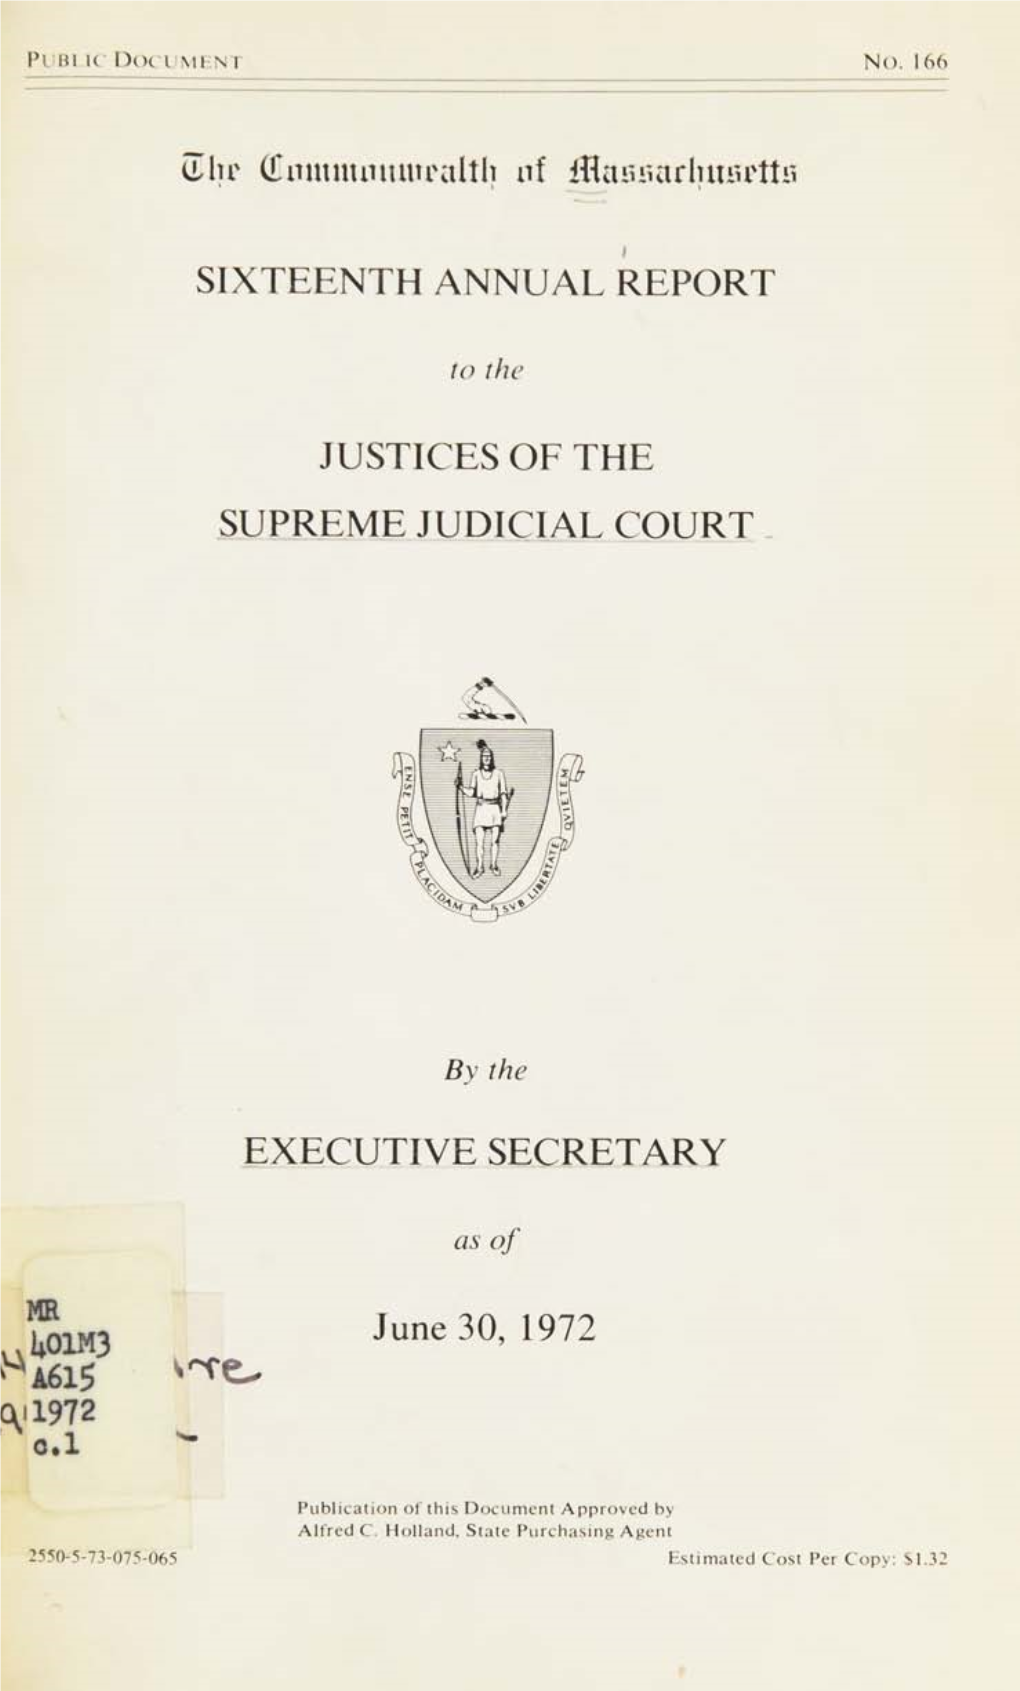 Sixteenth Annual Report Justices of the Supreme